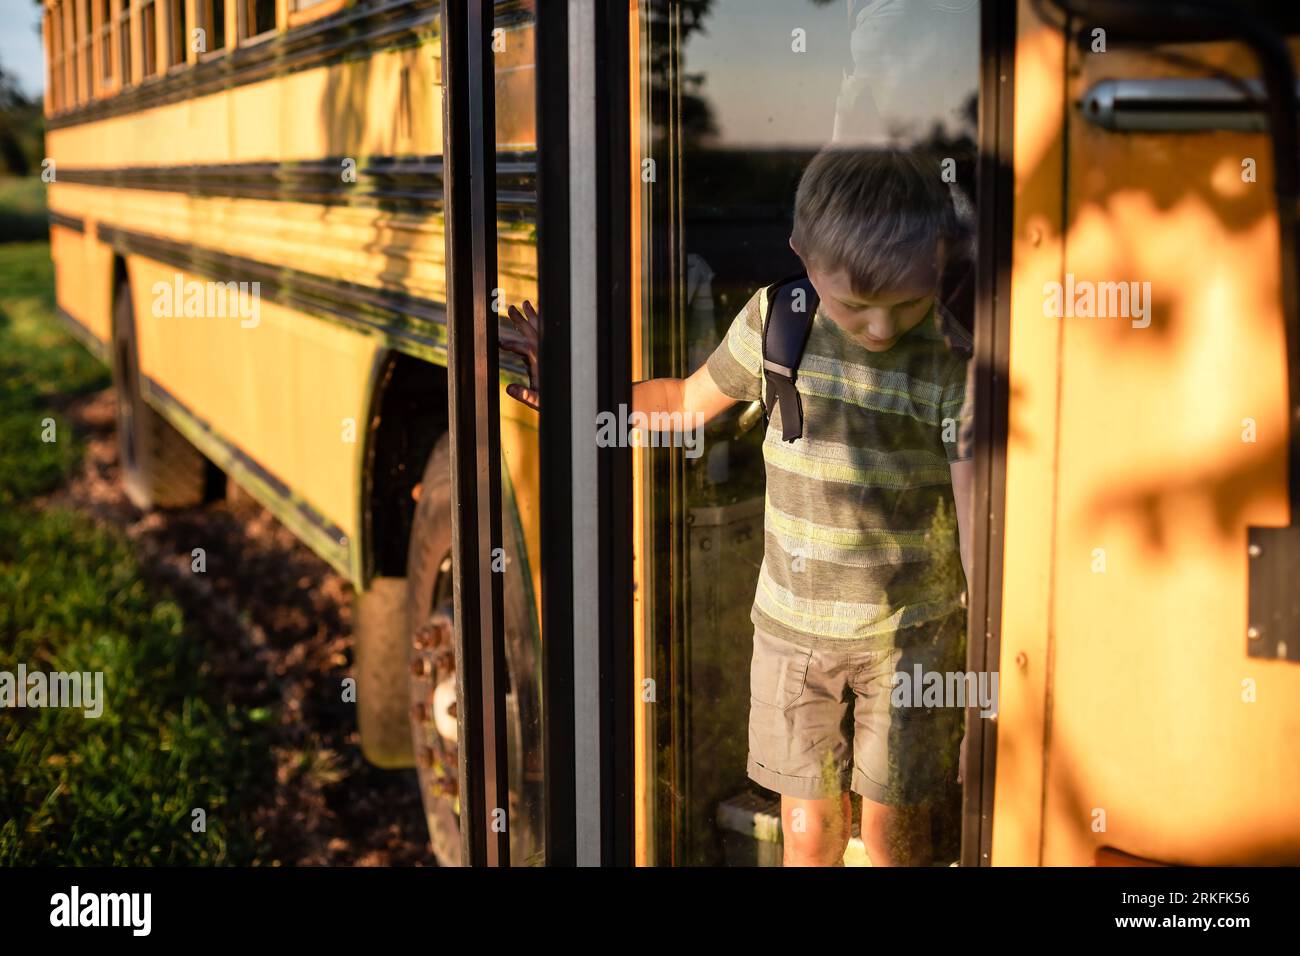 Child getting off the bus at bus stop after school Stock Photo